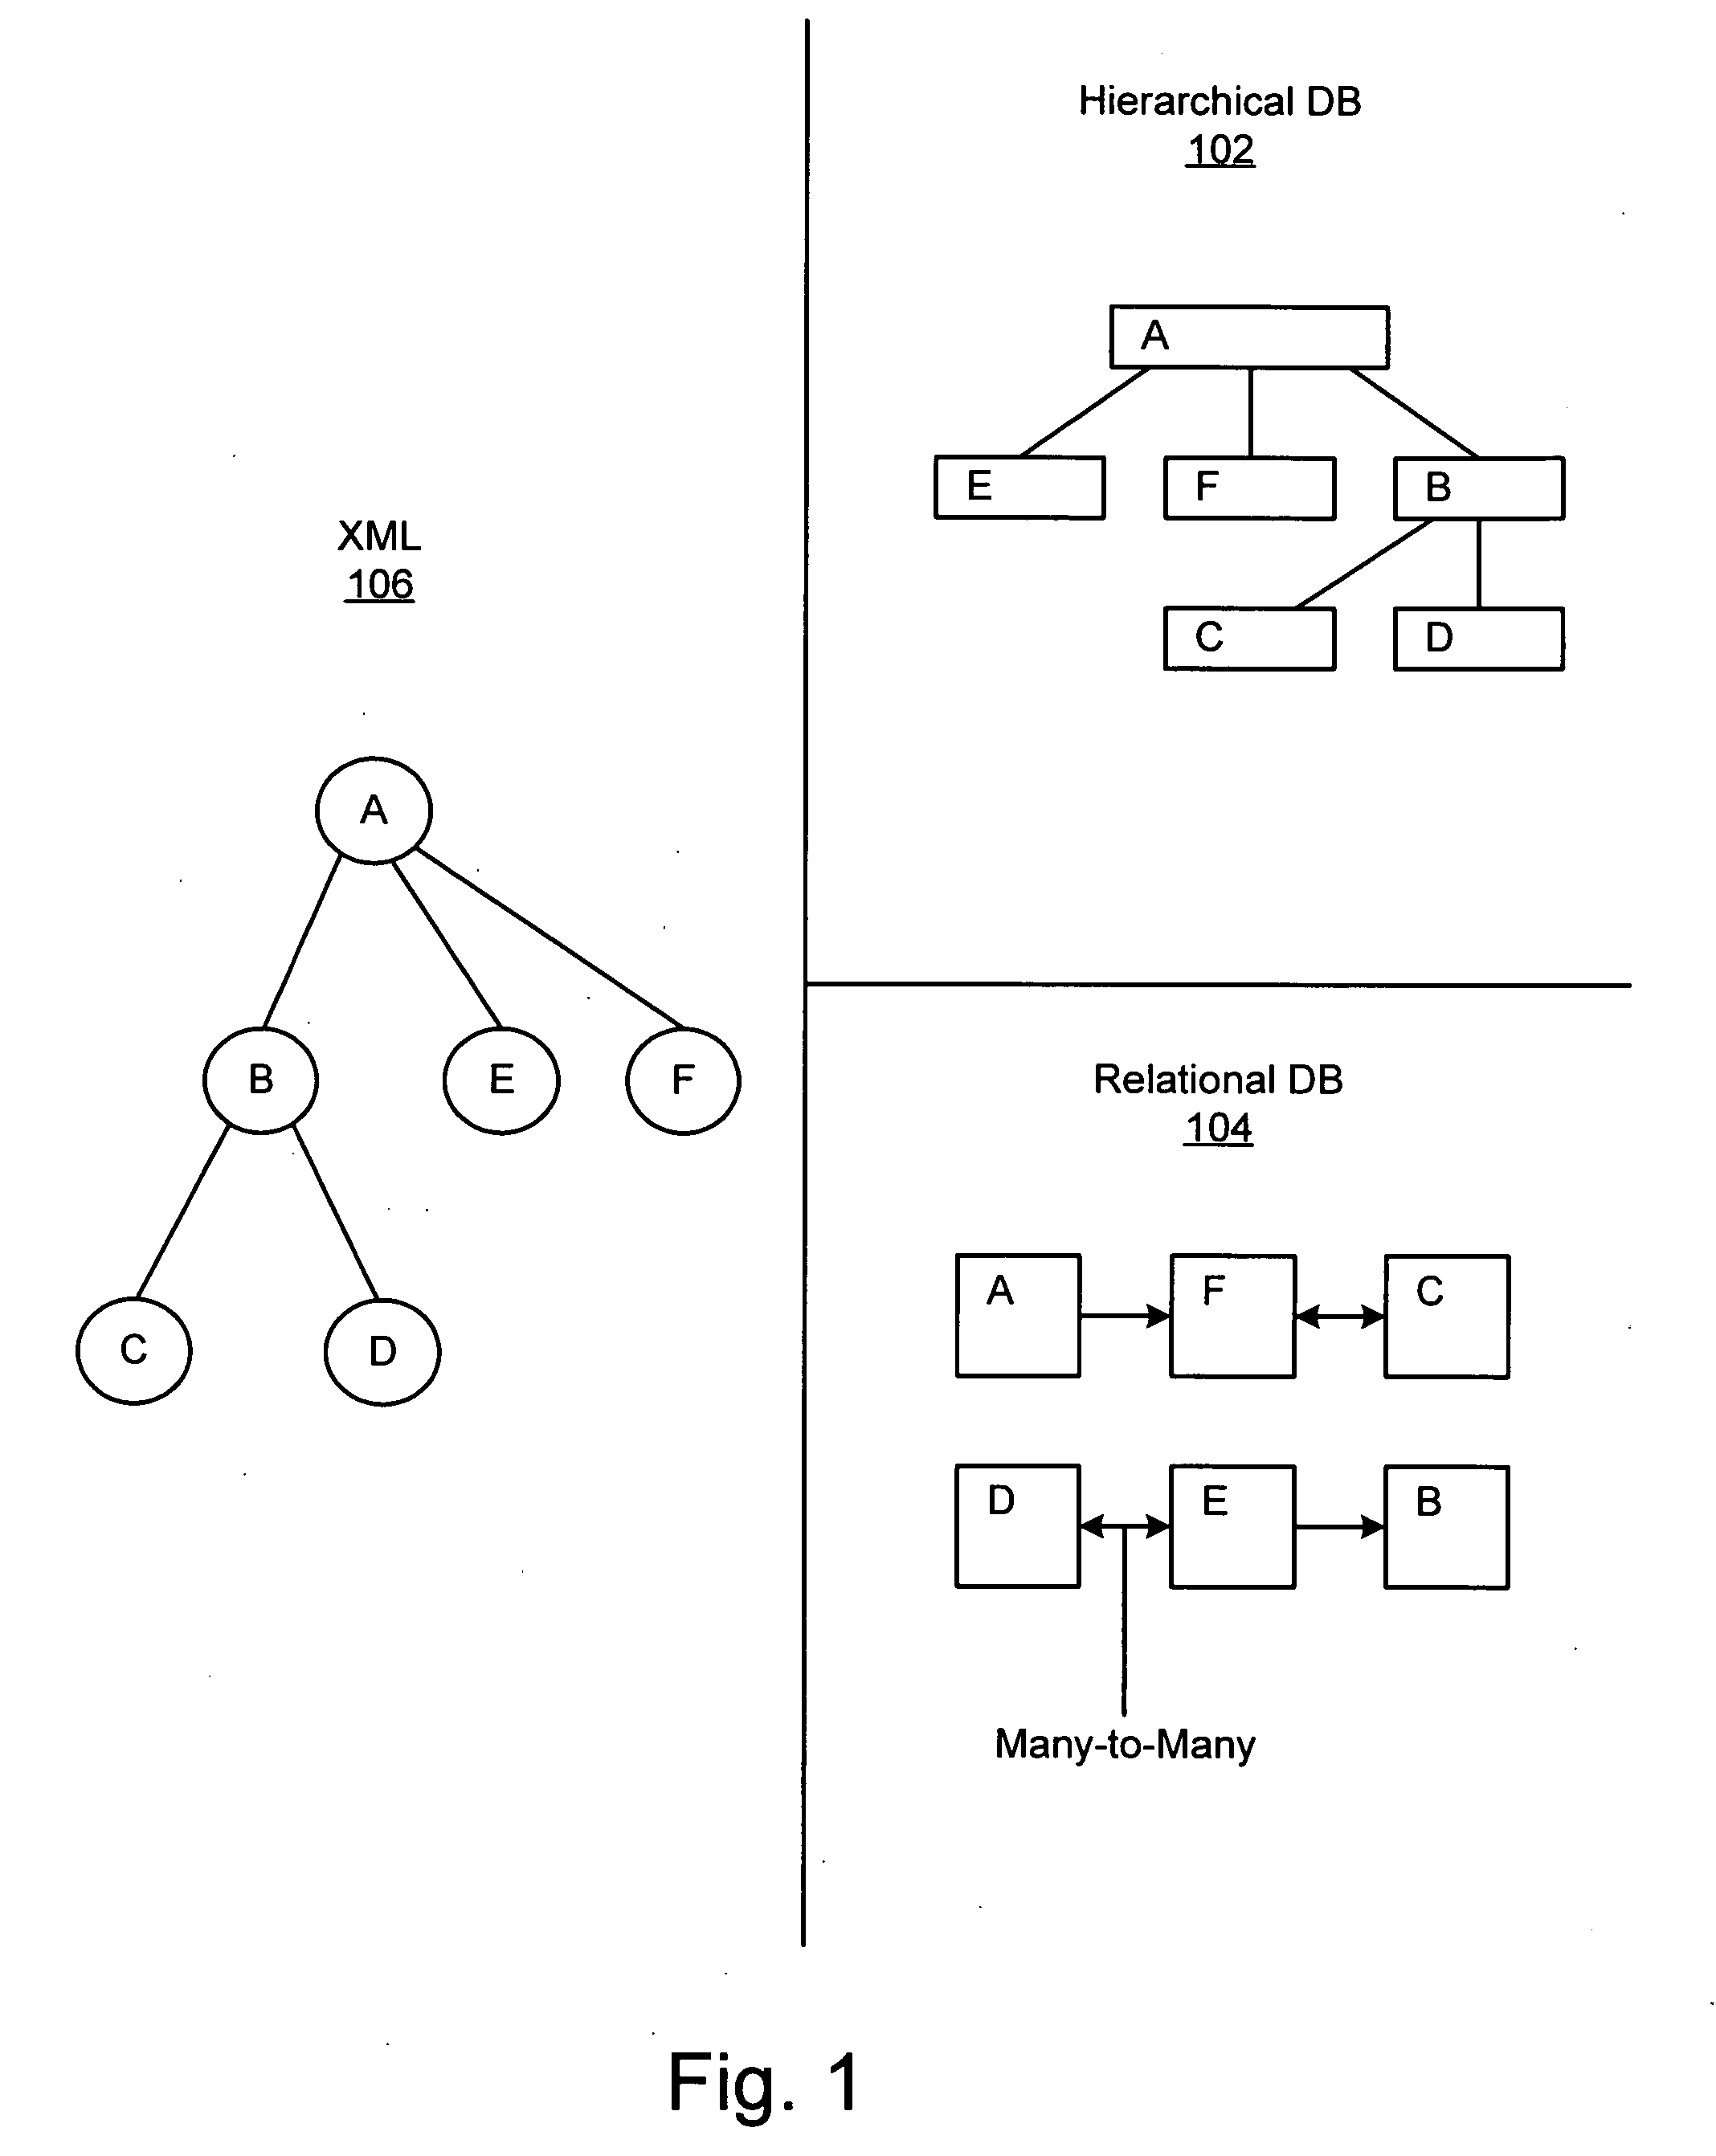 Apparatus, system, and method for defining a metadata schema to facilitate passing data between an extensible markup language document and a hierarchical database